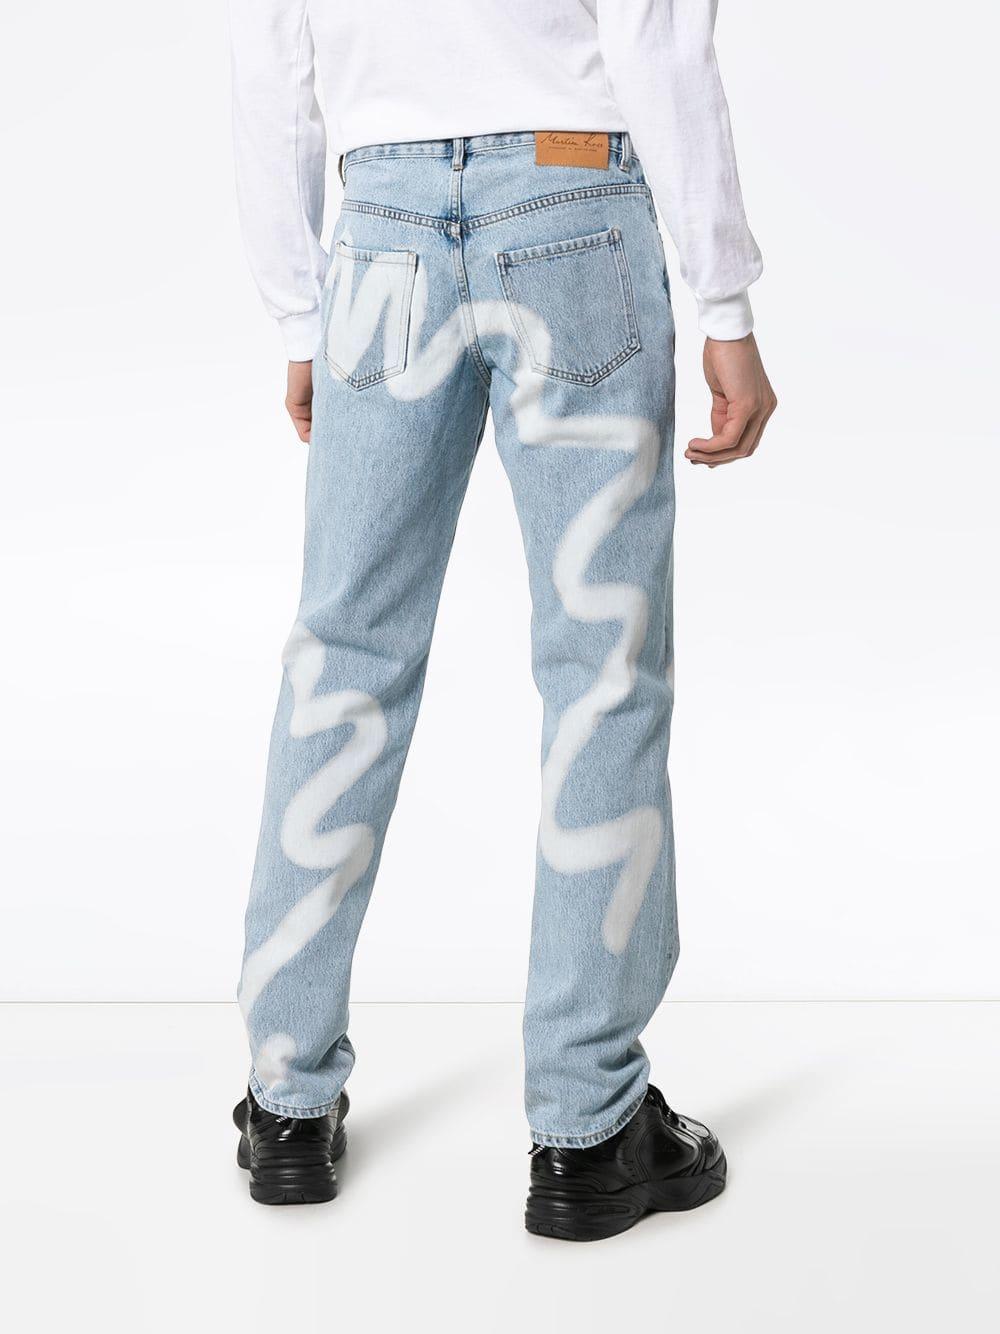 Martine Rose Wavey Print Straight Leg Jeans in Blue for Men - Save 31% ...